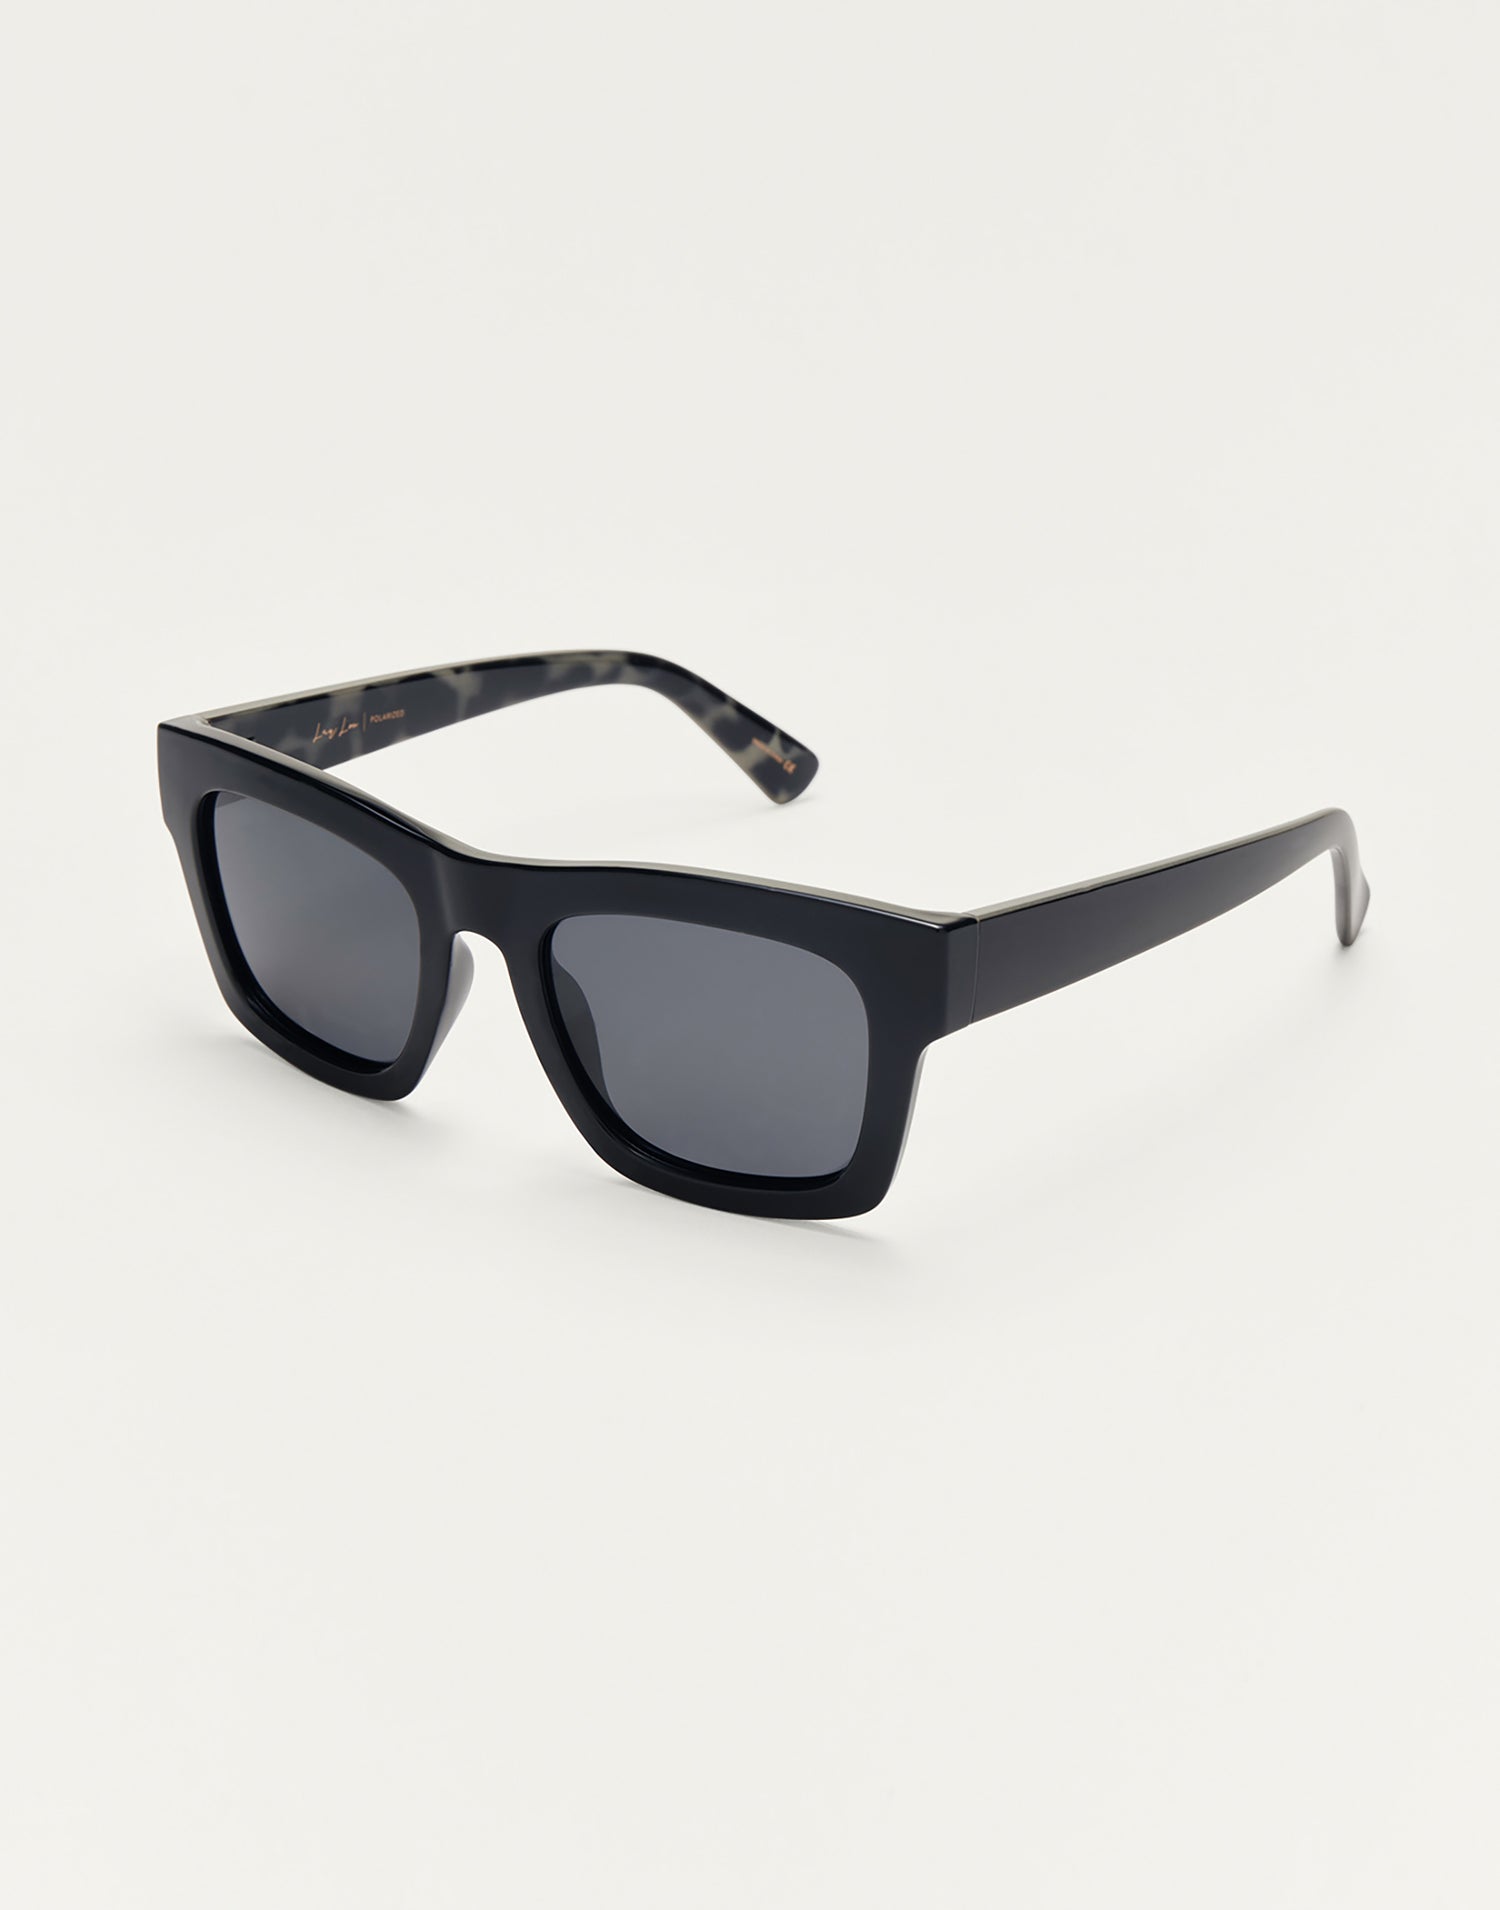 Laylow Sunglasses by Z Supply in Polished Black - Angled View